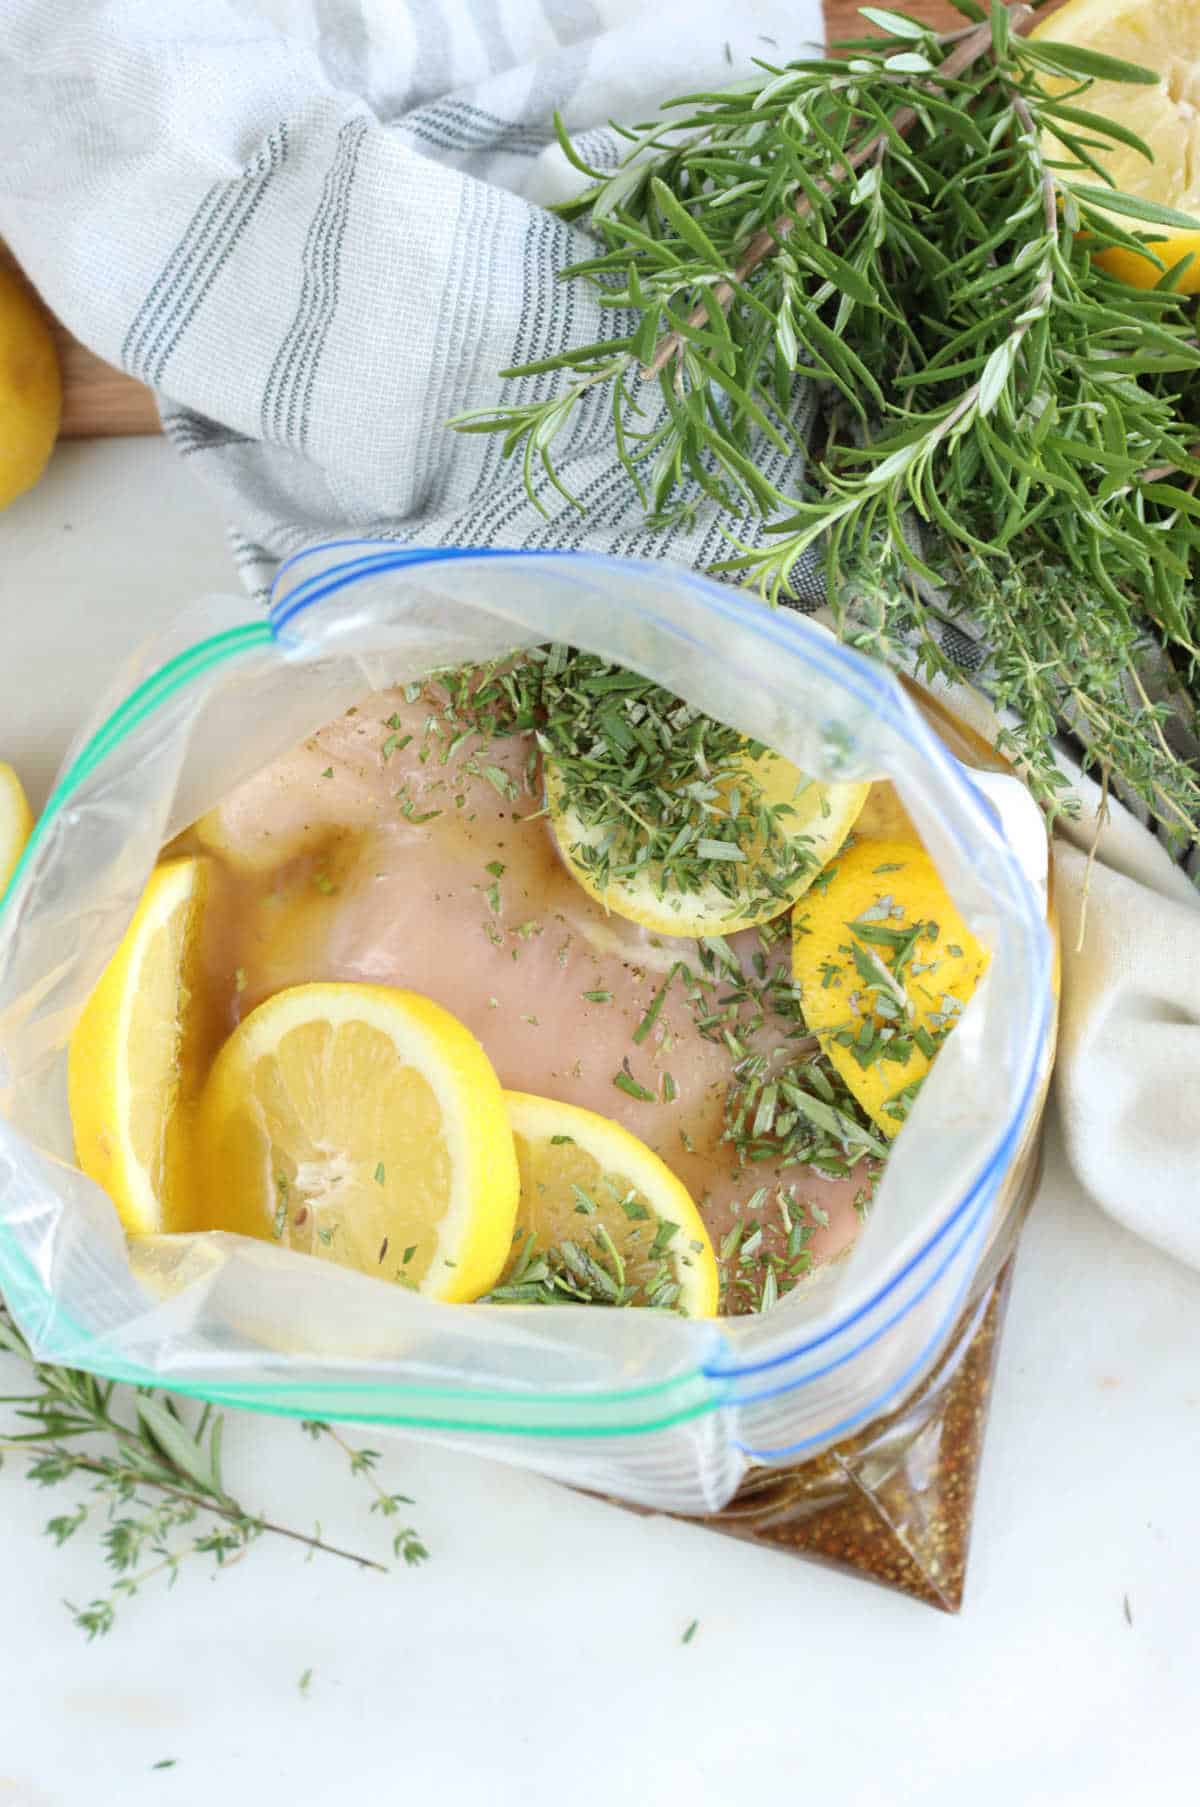 Large zip-style bag with chicken breasts marinating, lemon slices and herbs.